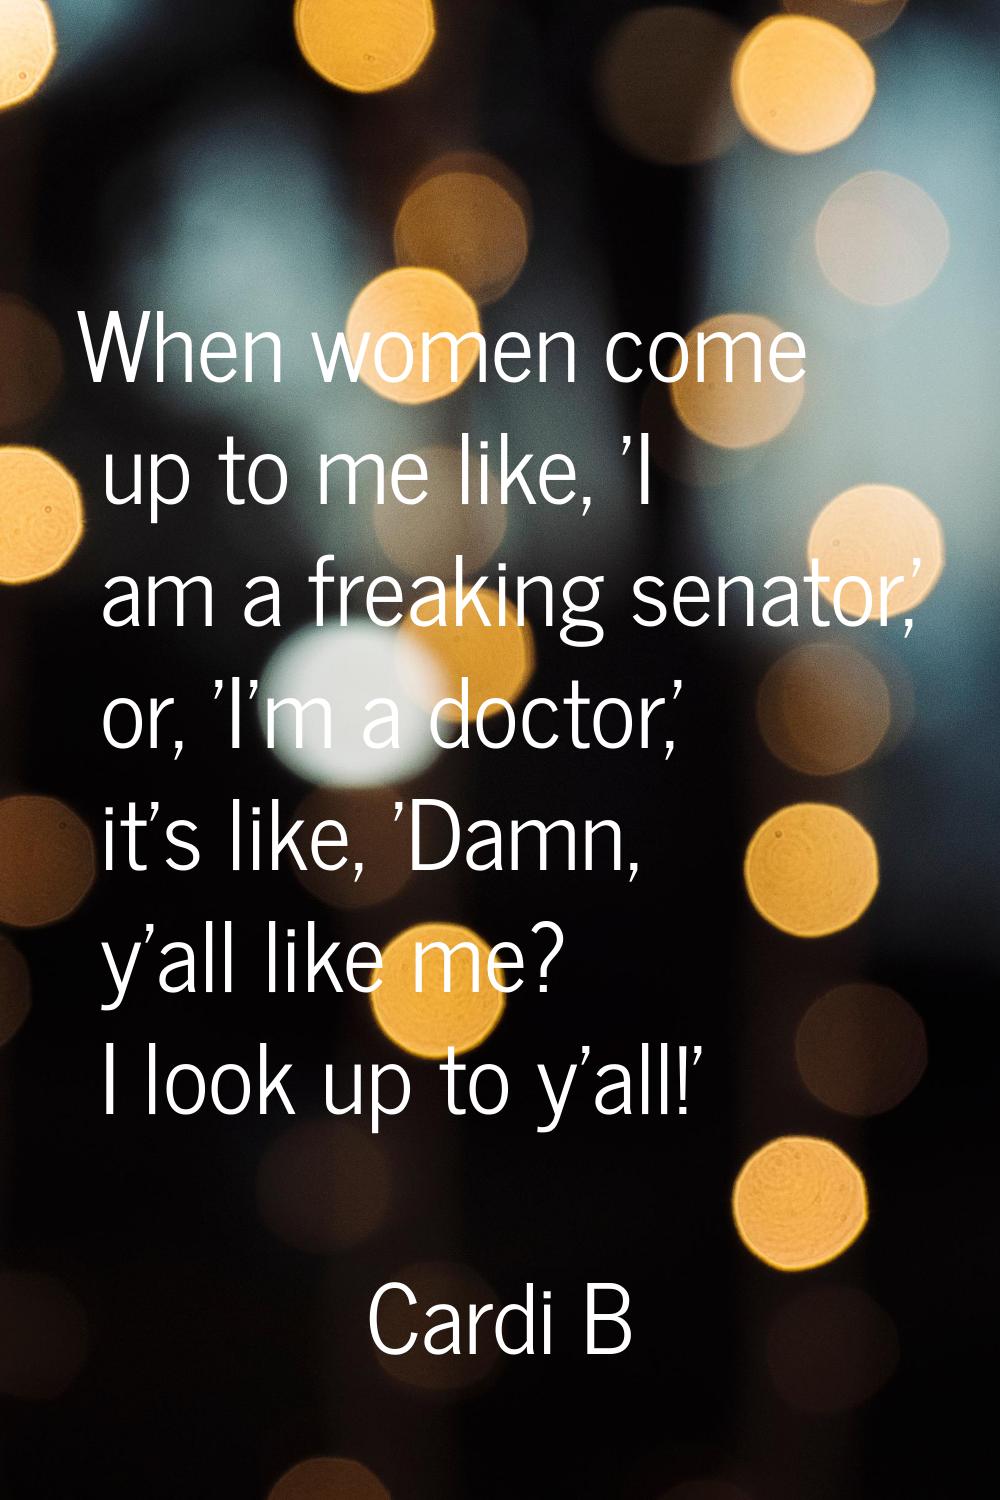 When women come up to me like, 'I am a freaking senator,' or, 'I'm a doctor,' it's like, 'Damn, y'a